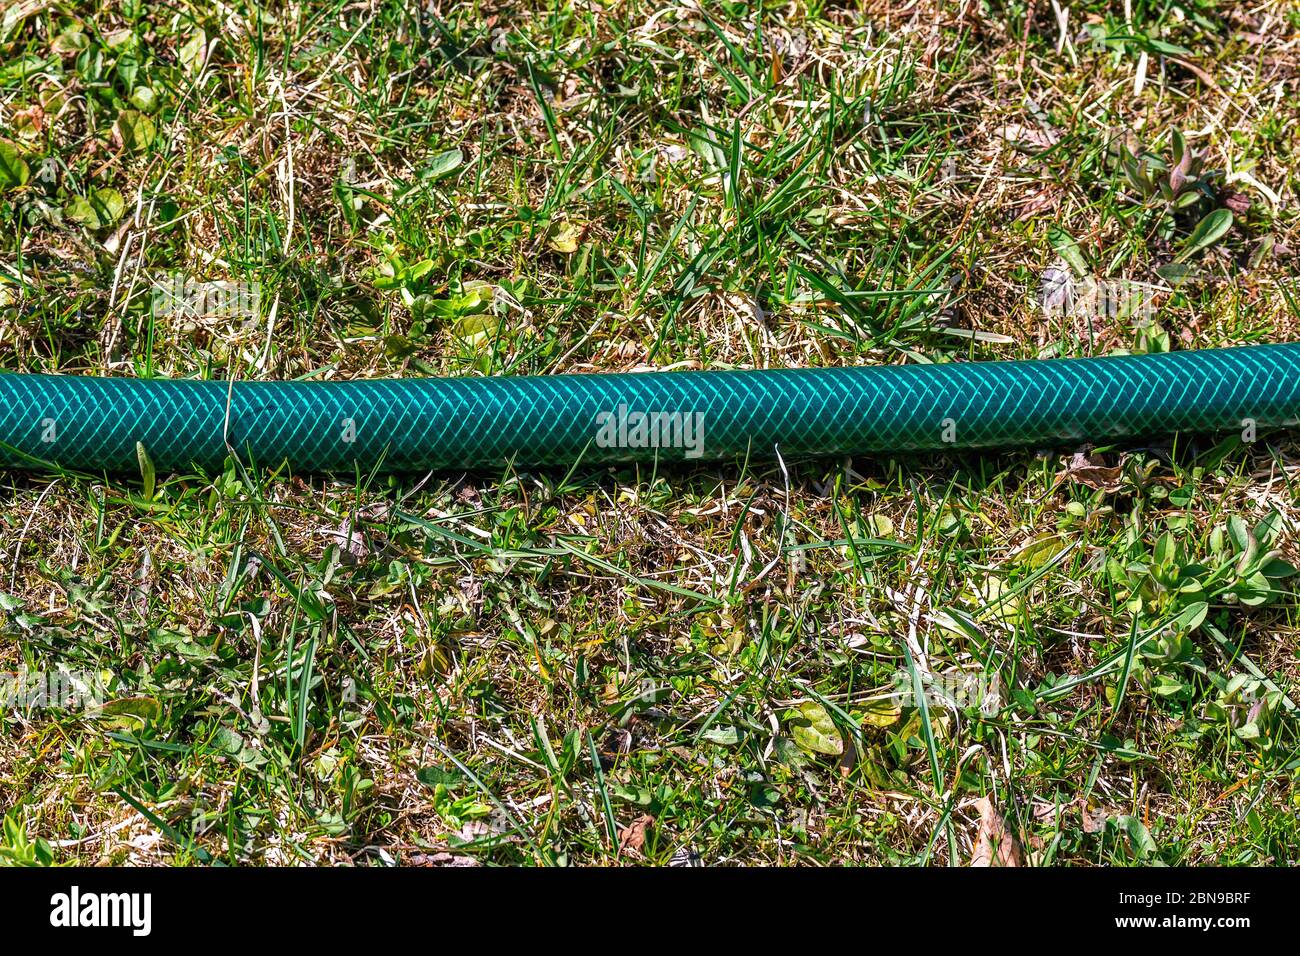 Fragment of a green reinforced garden hose is lying on the ground covered with green grass. Stock Photo